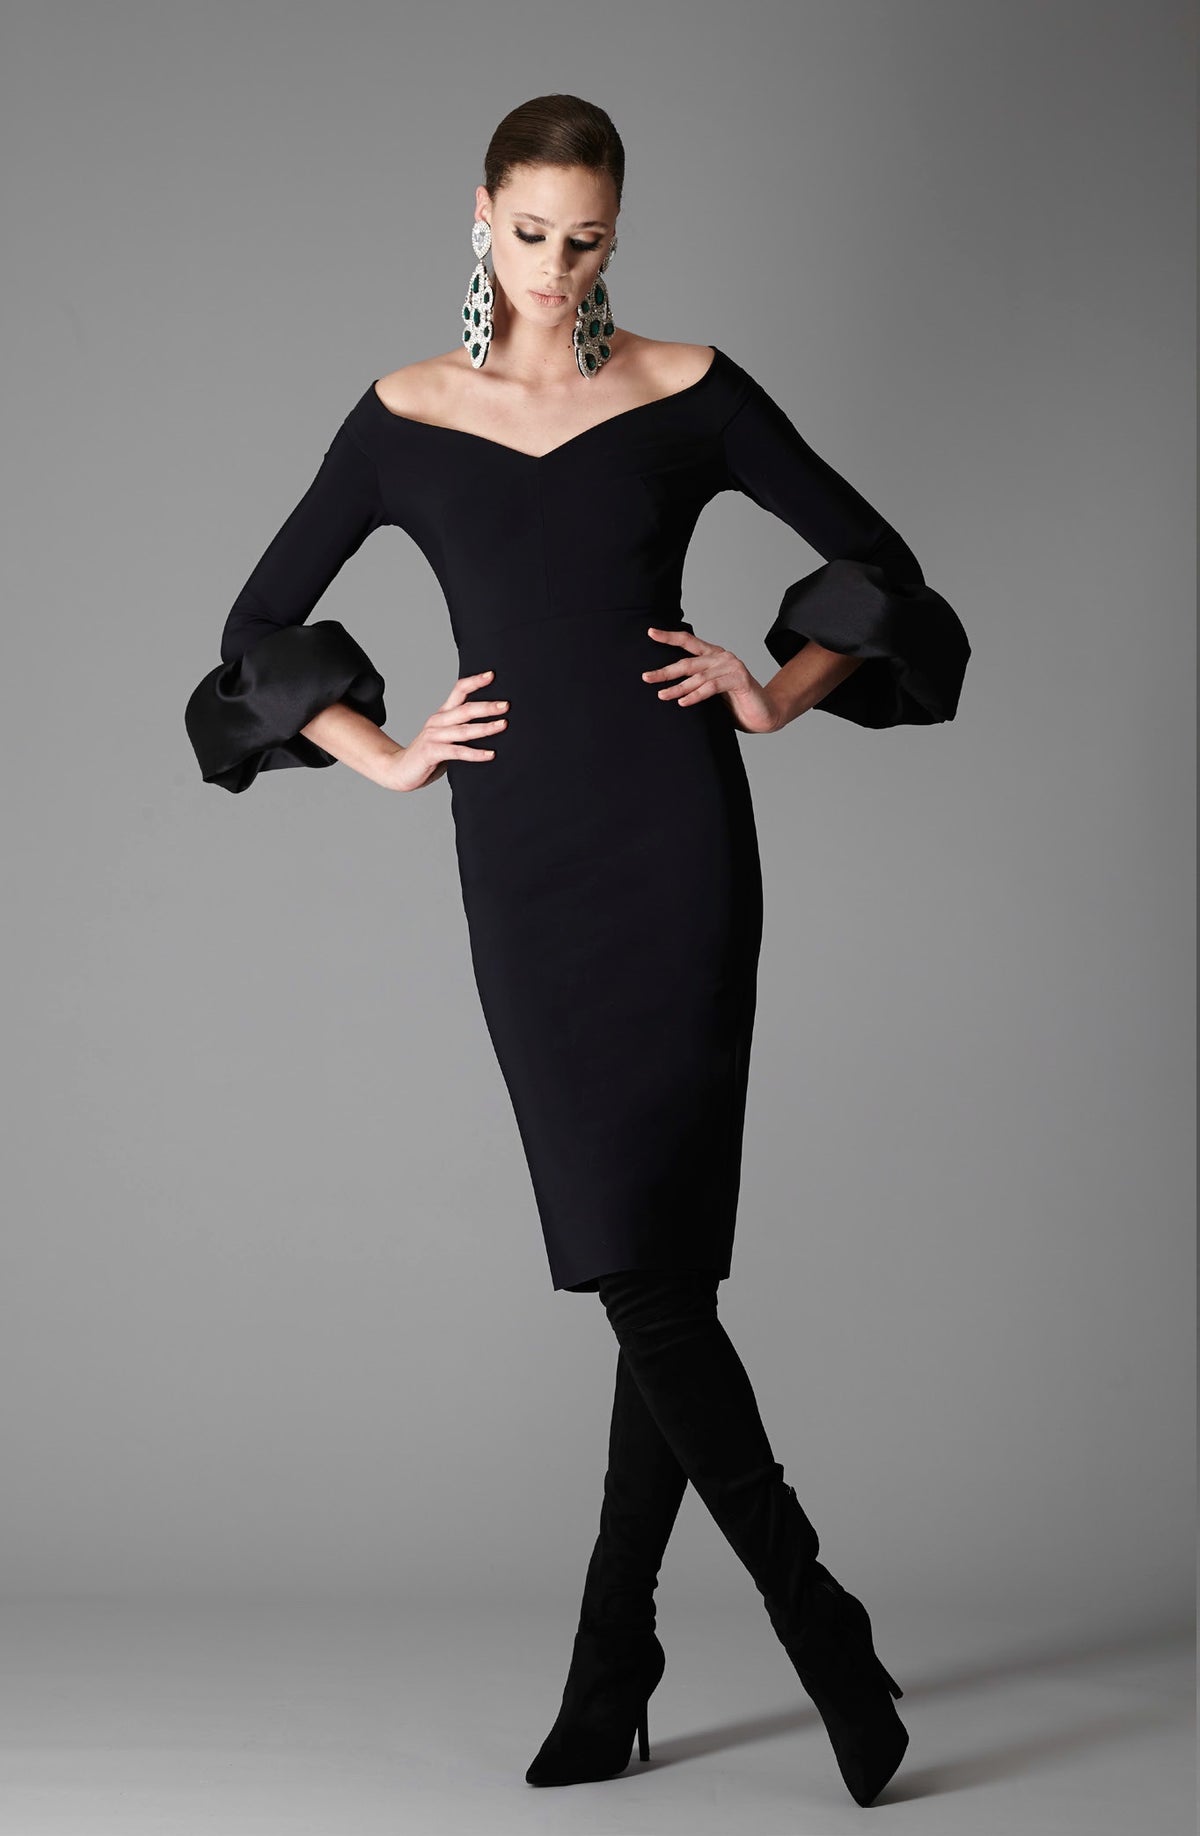 The Greta Constantine Sloane Sweetheart Neckline Cocktail Dress, a captivating and sophisticated choice for evening events, featuring long sleeves with dramatic balloon cuffs.